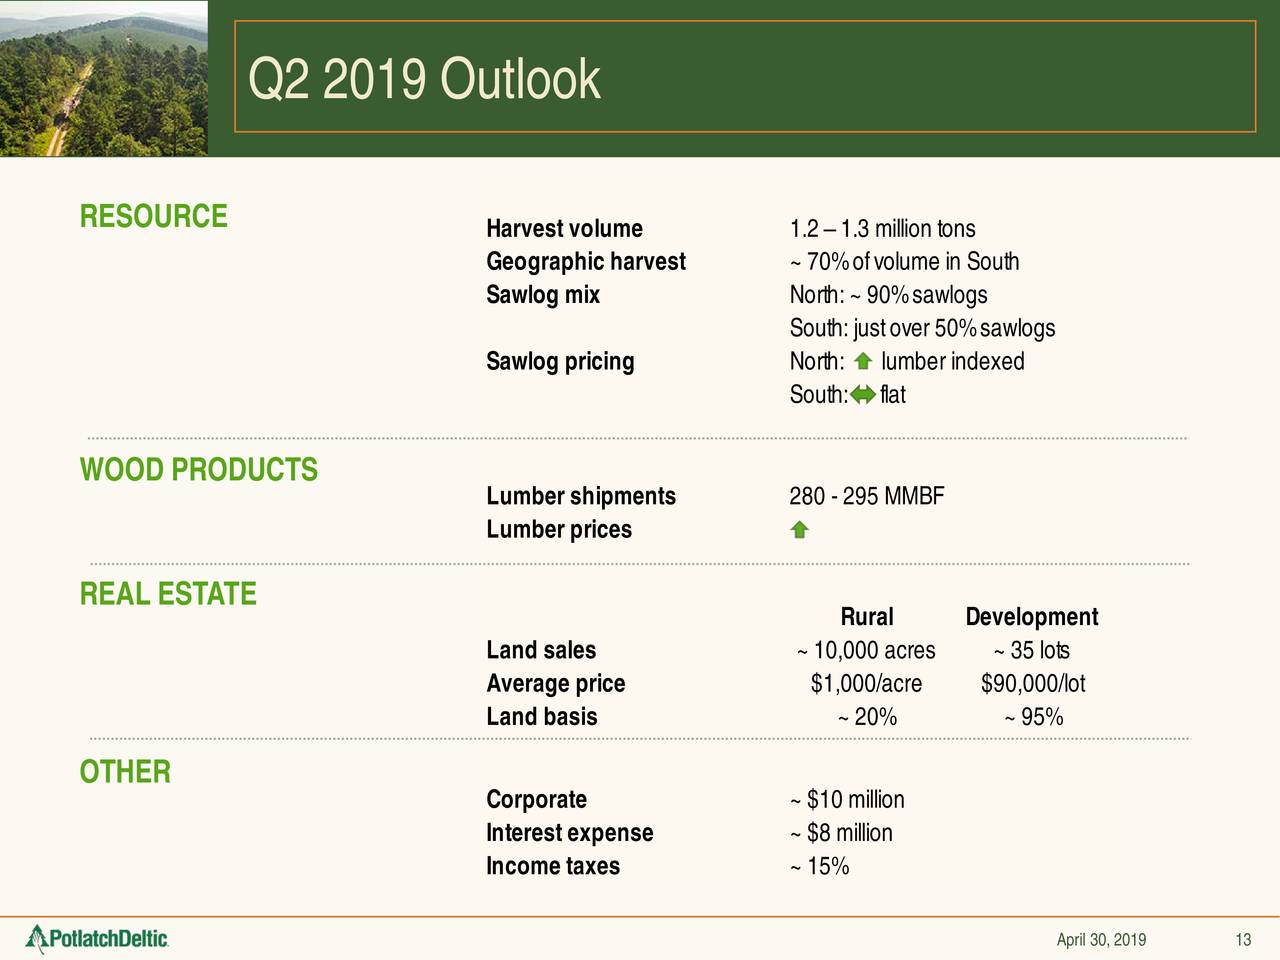 Q2 2019 Outlook